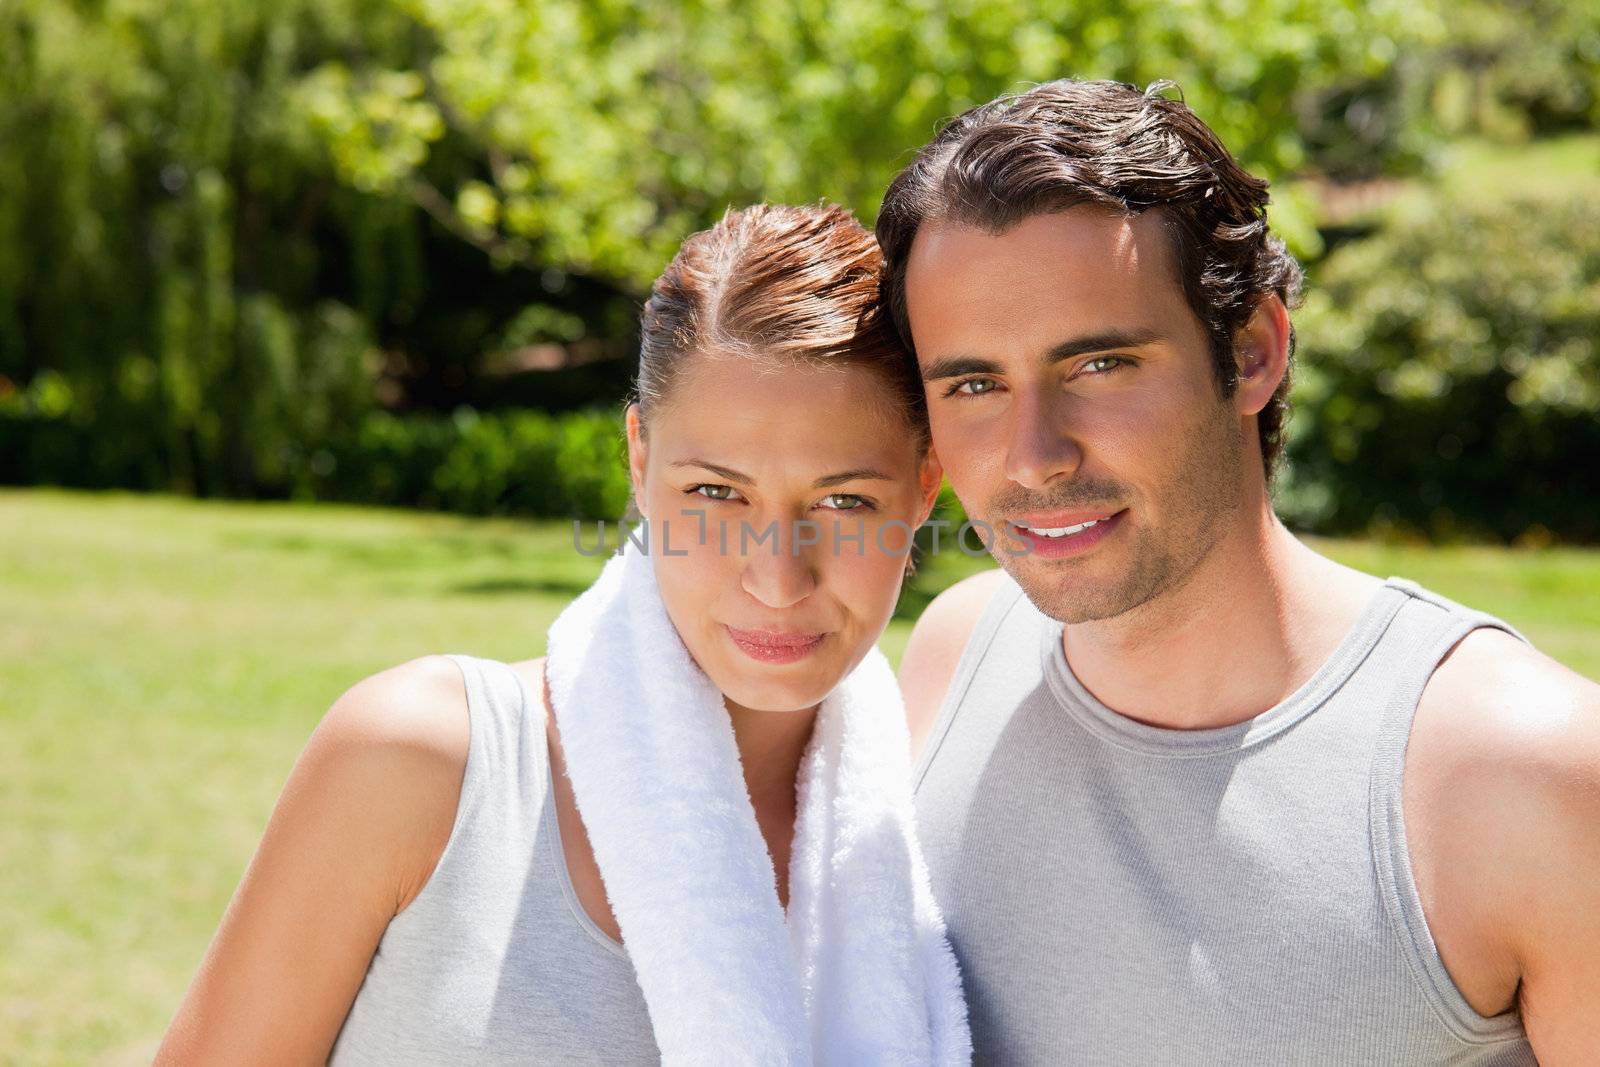 Woman with a white towel around her neck standing with a smiling man in workout gear